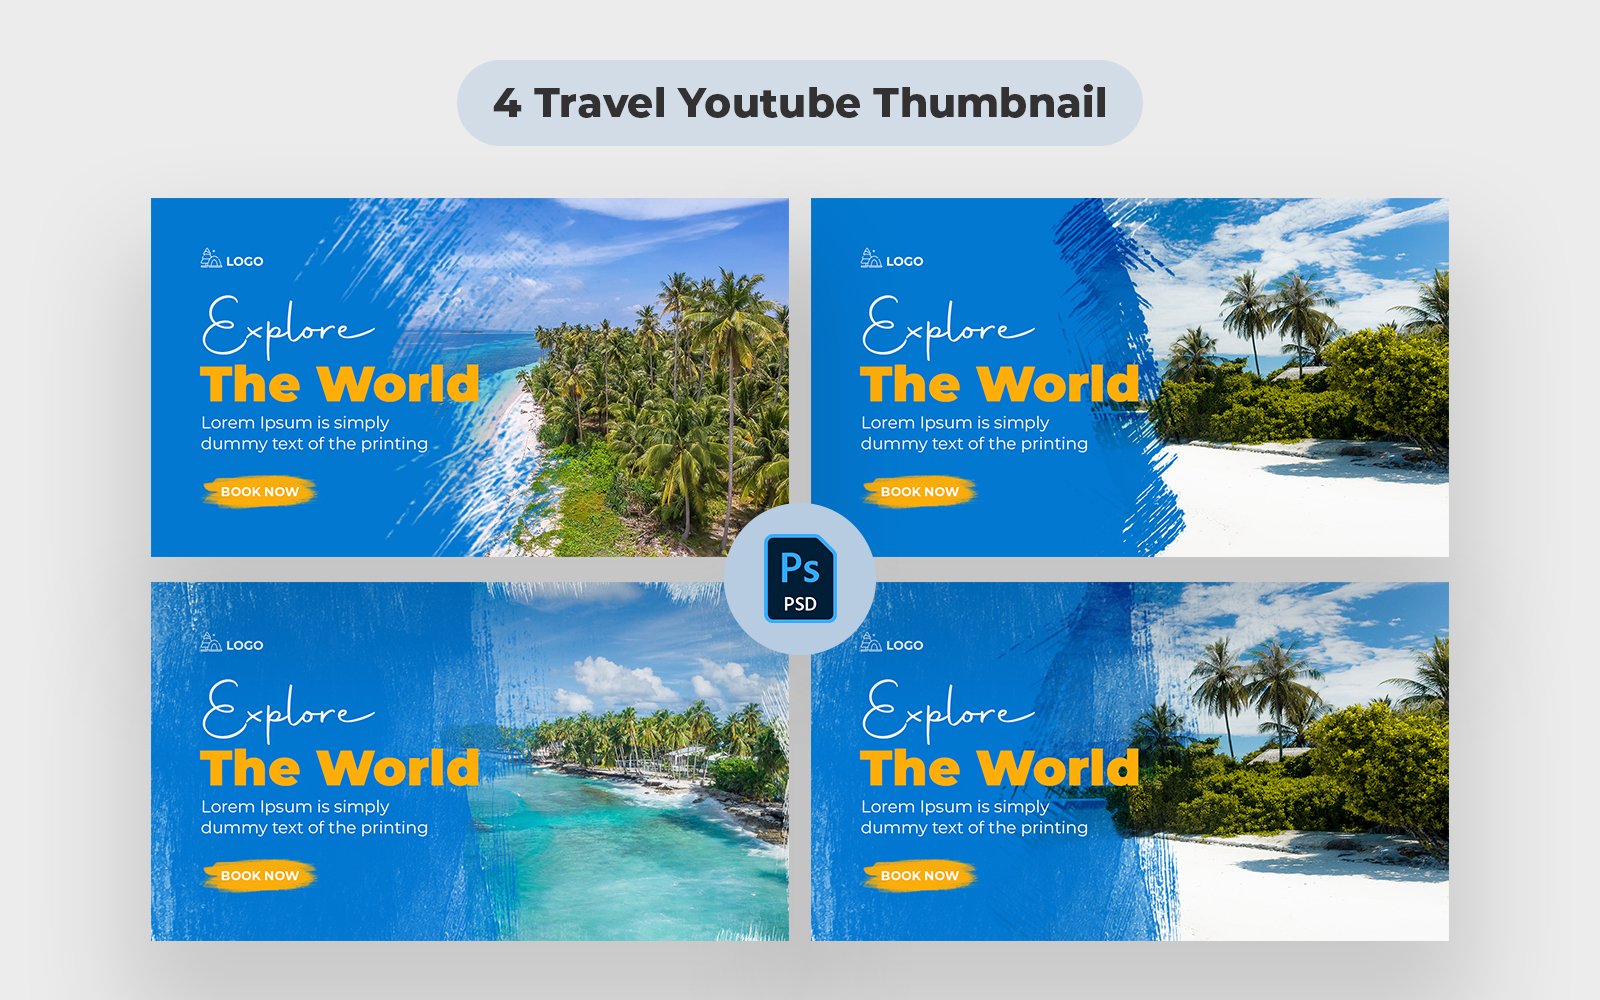 Template #293643 Travel Thumbnail Webdesign Template - Logo template Preview